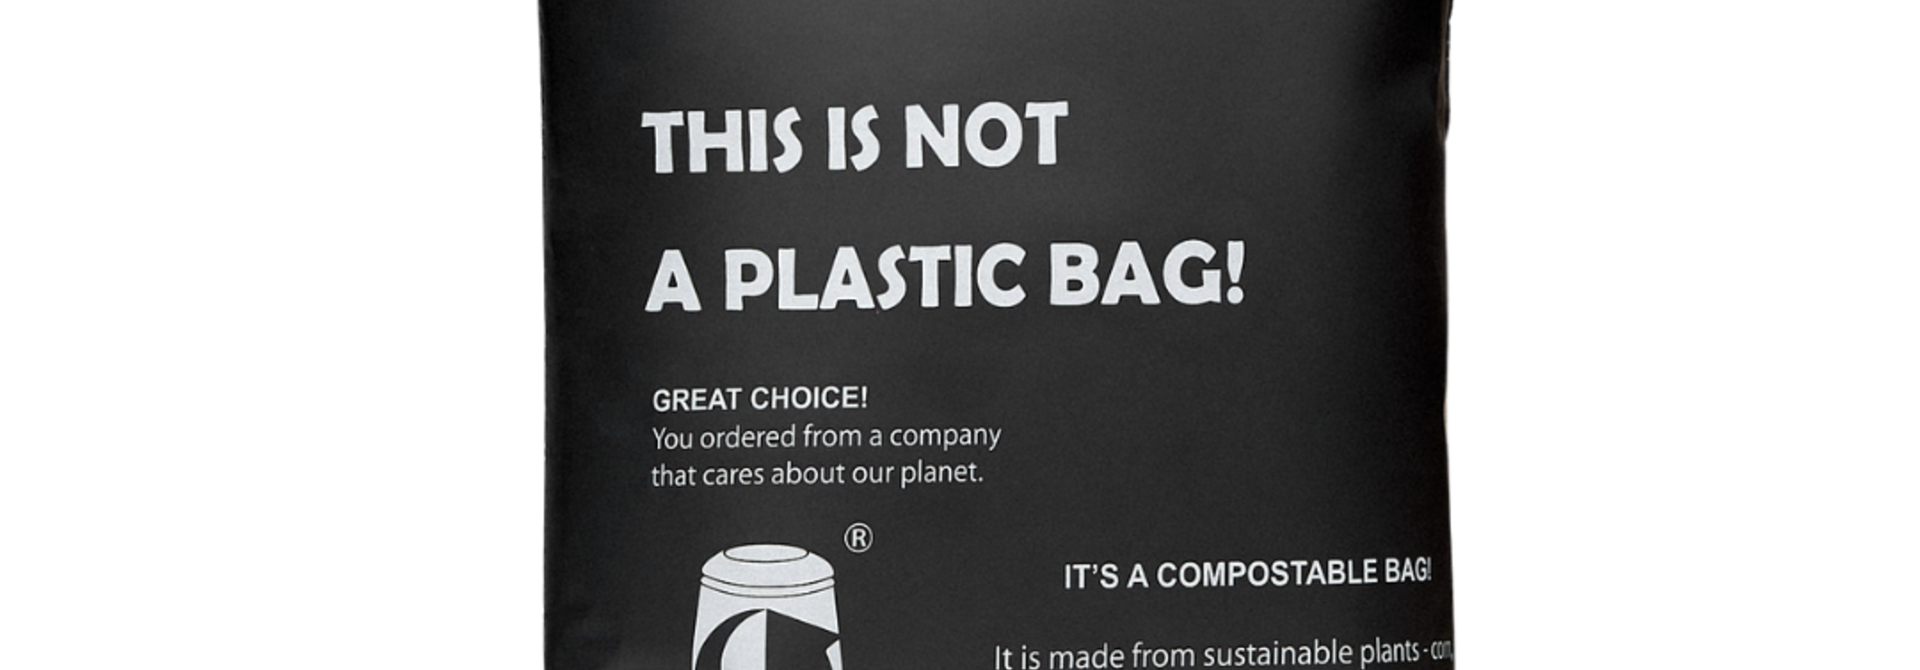 Compostable mailer